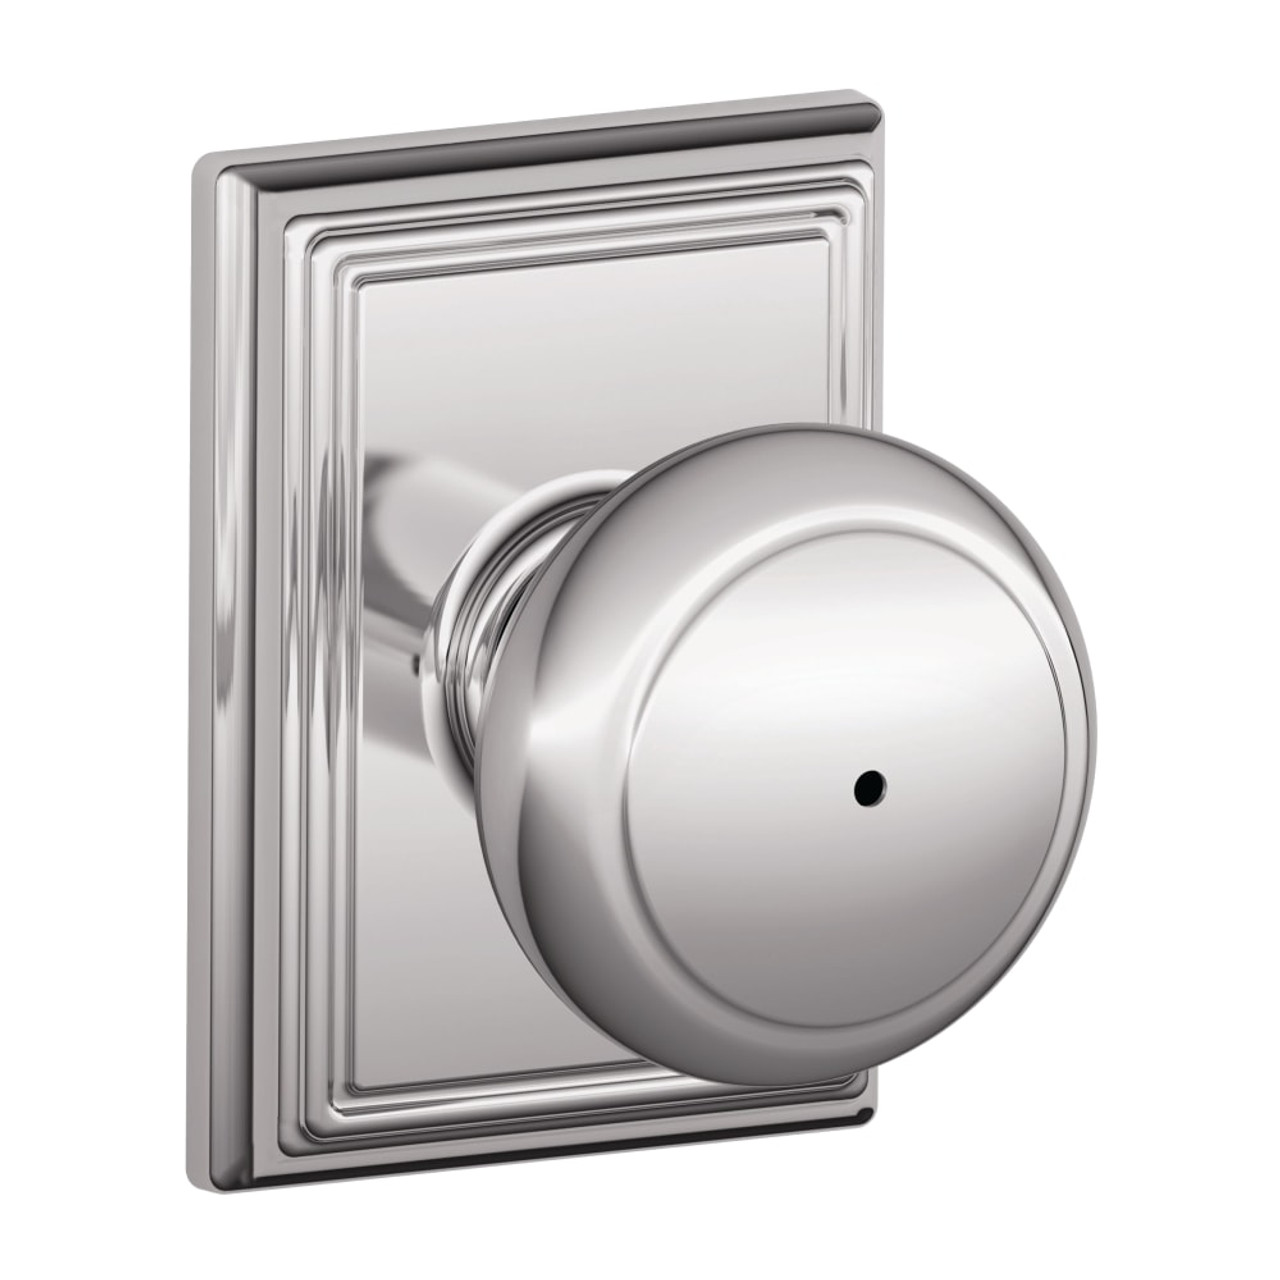 Schlage Residential F40 AND 625 ADD Privacy Lock Andover Knob Addison Rose  Bright Chrome B and H Depot Door Hardware Shop